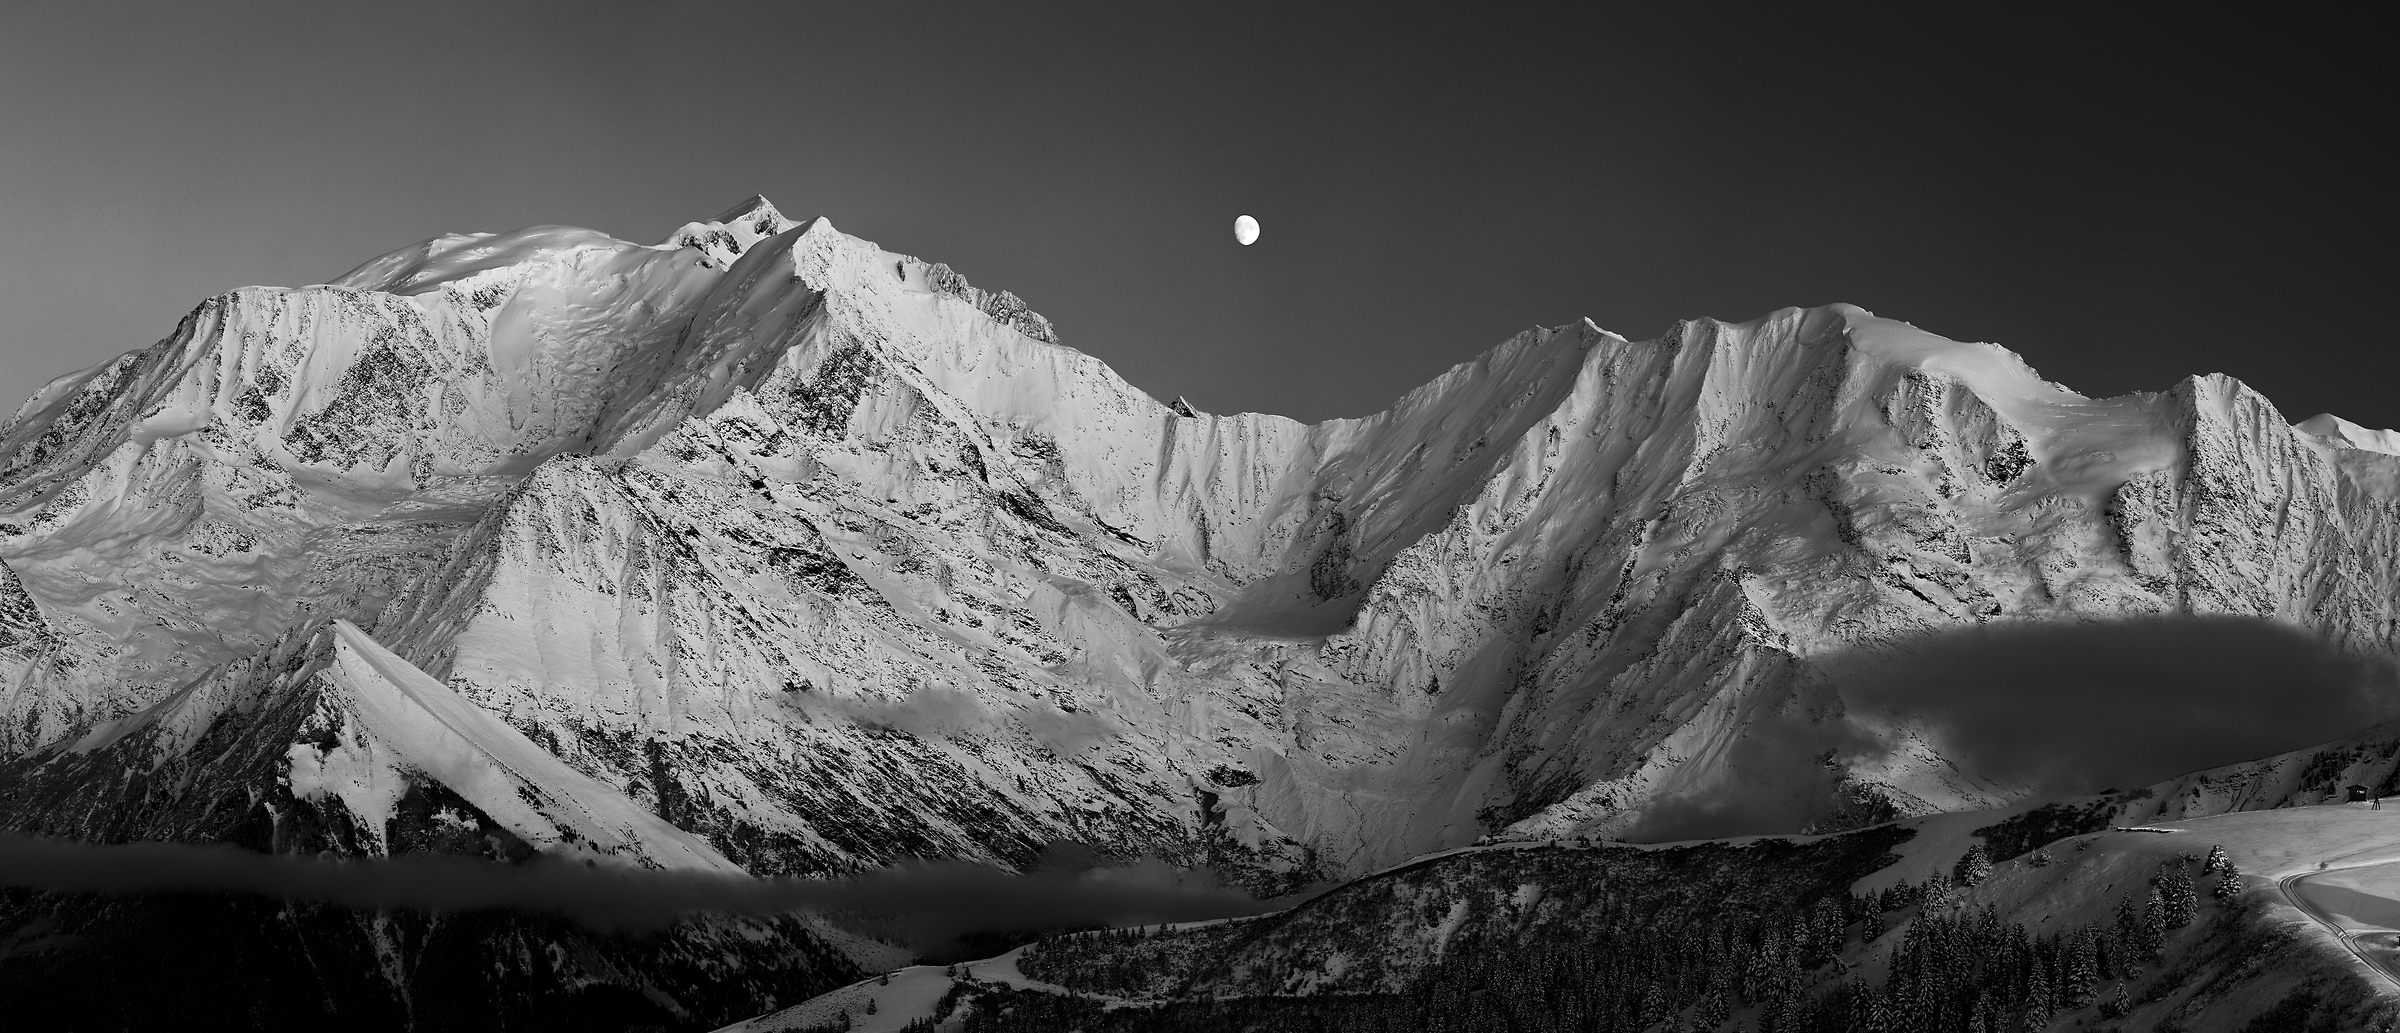 283 megapixels! A very high resolution, large-format VAST photo print of a mountain range with the moon at nighttime; black & white landscape photograph created by Alexandre Deschaumes in Mont Blanc Massif, Saint-Gervais-les-Bains, France.